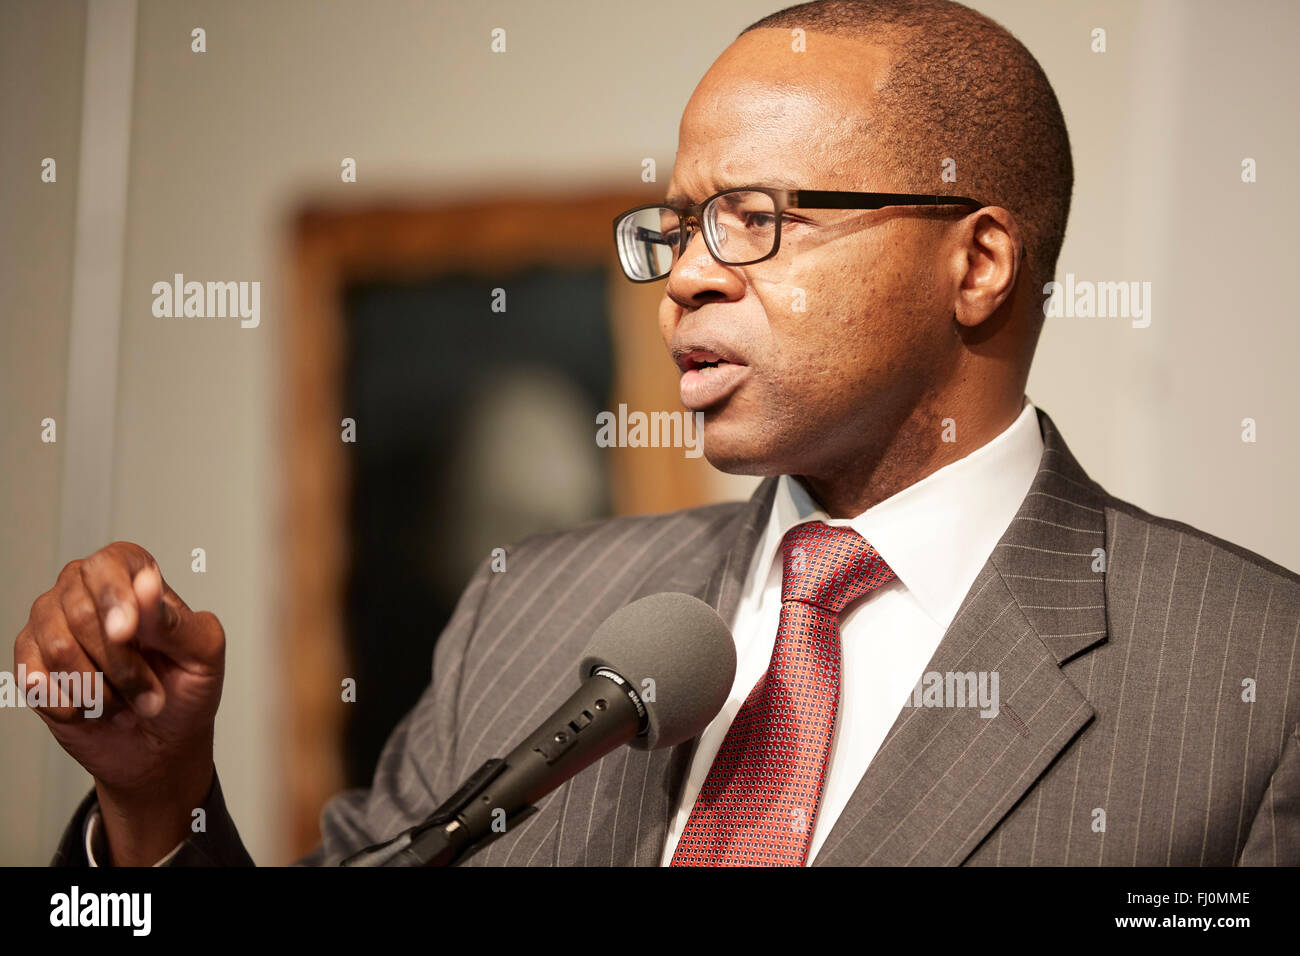 Ken Thompson, Brooklyn DA speaks at Martin Luther King Jr. day at NA House of Justice Harlem Stock Photo